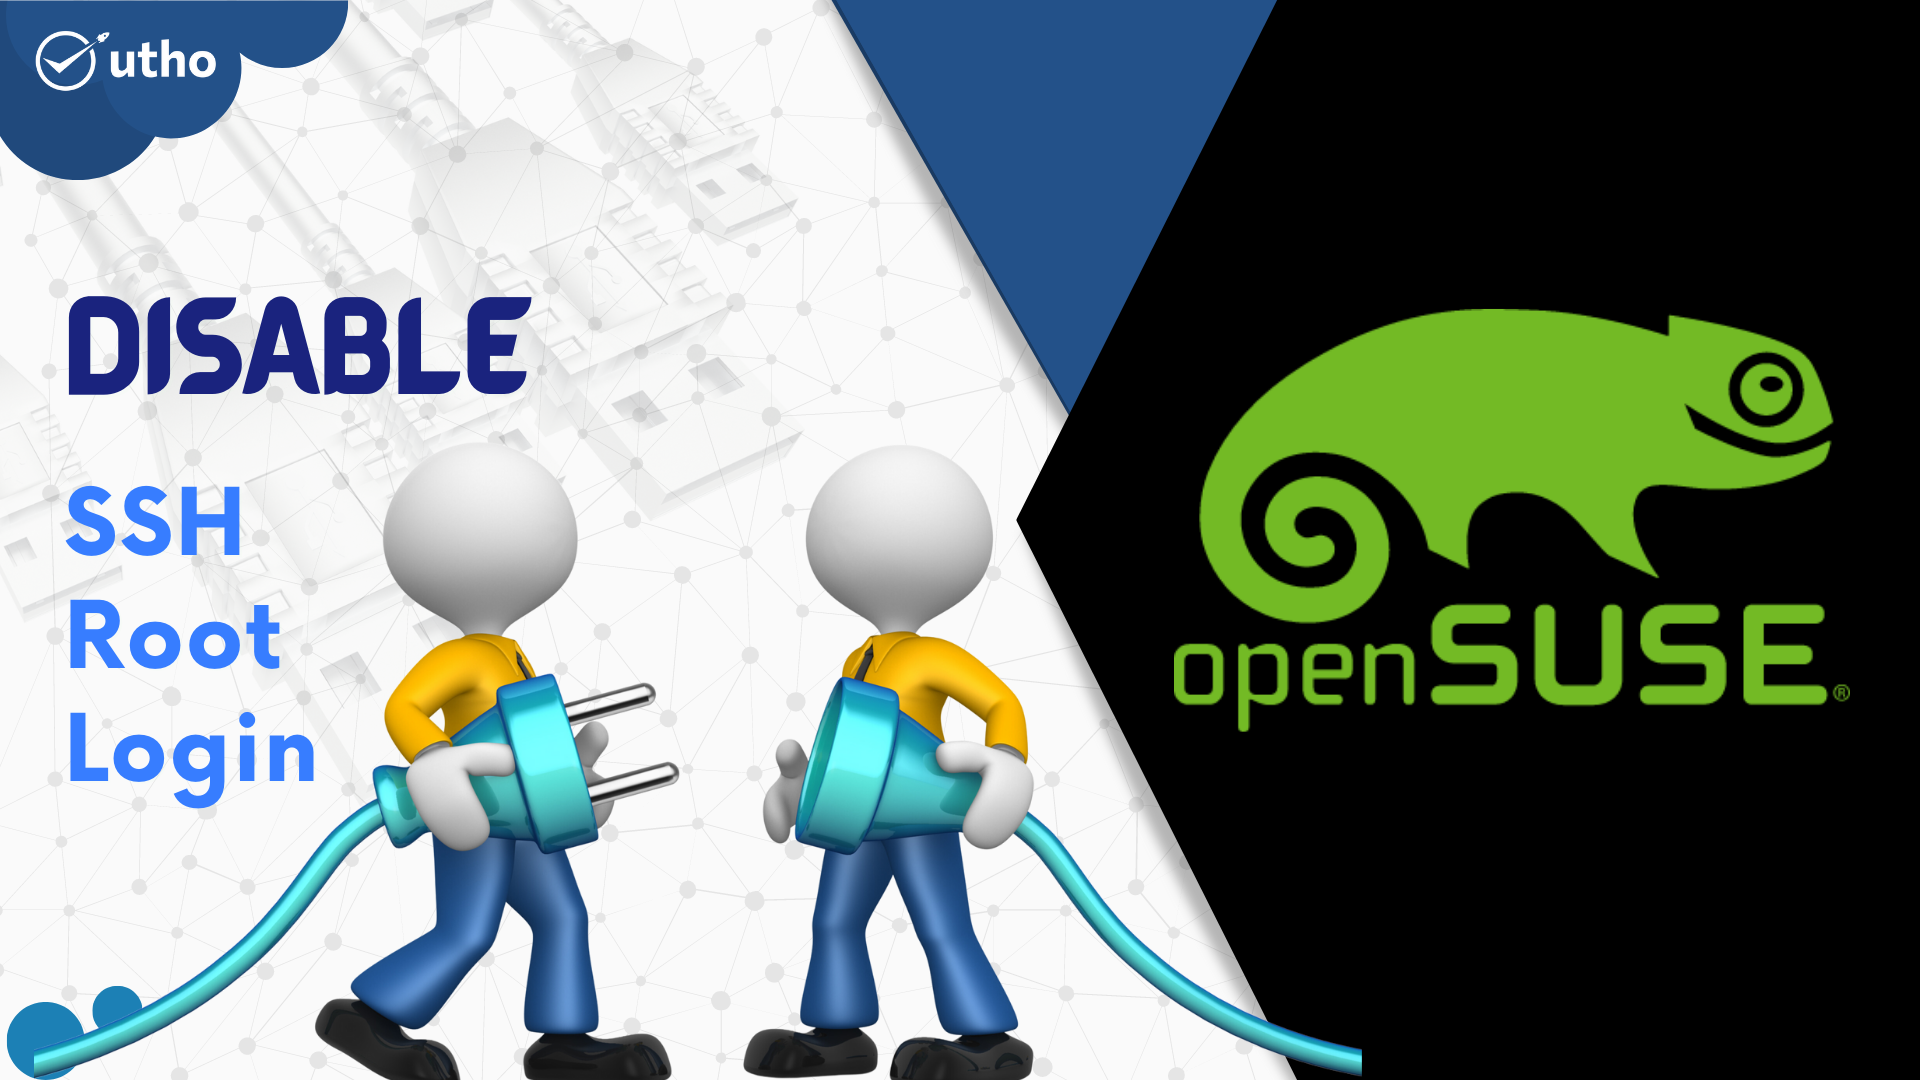 How to install Docker on Opensuse